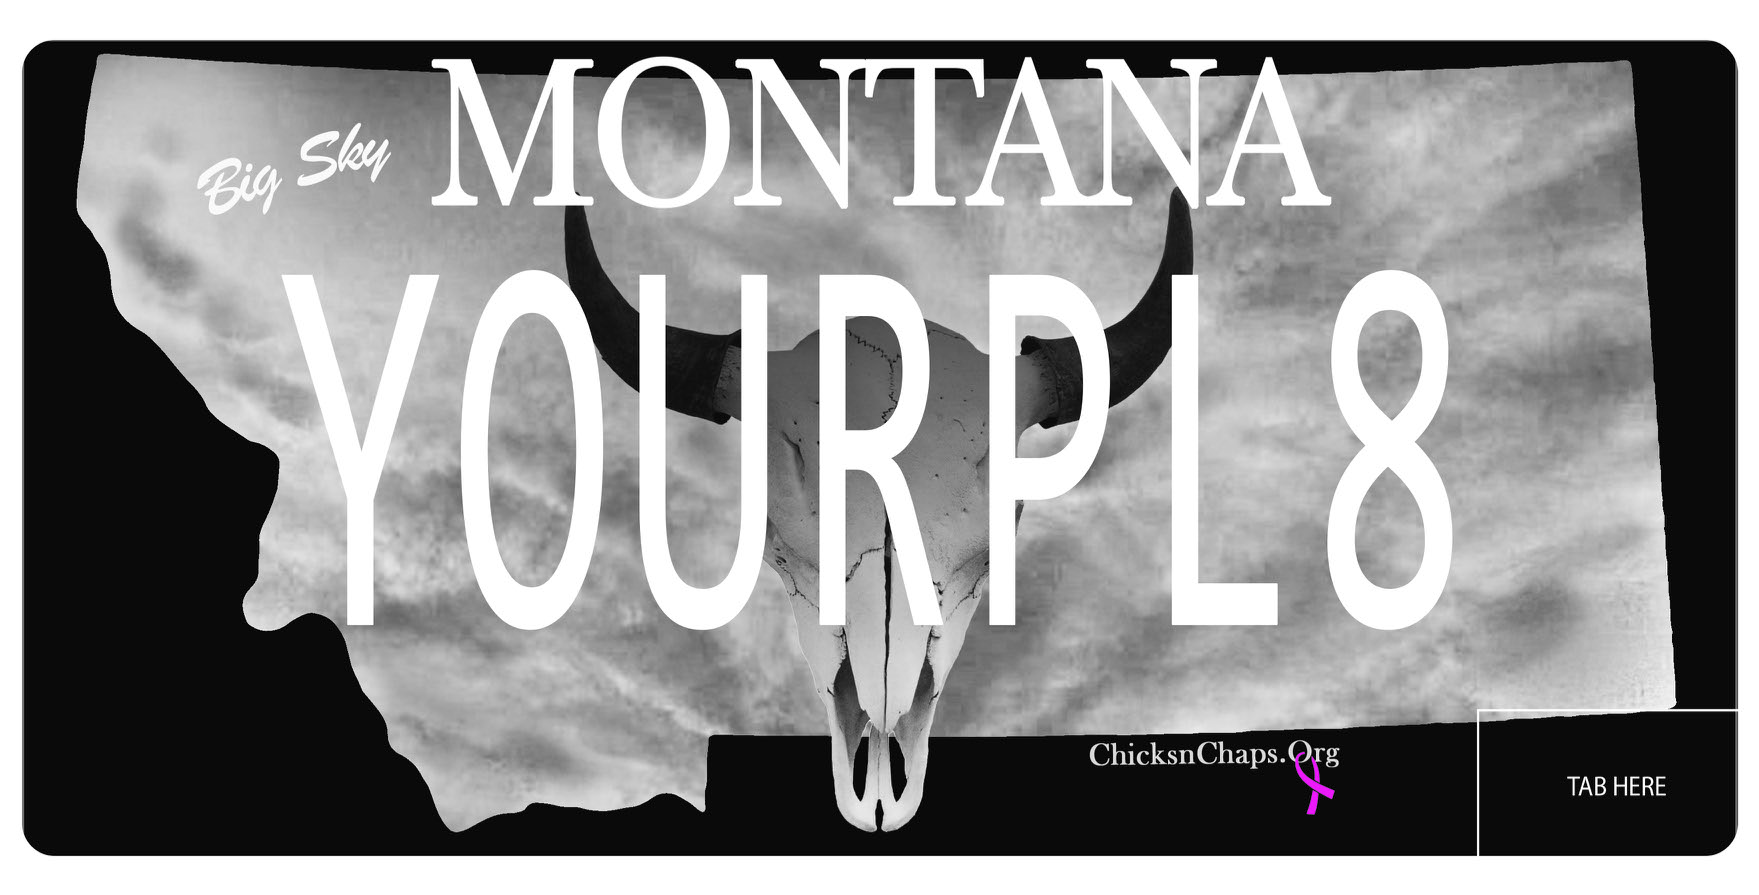      Get Your Montana License Plate Today